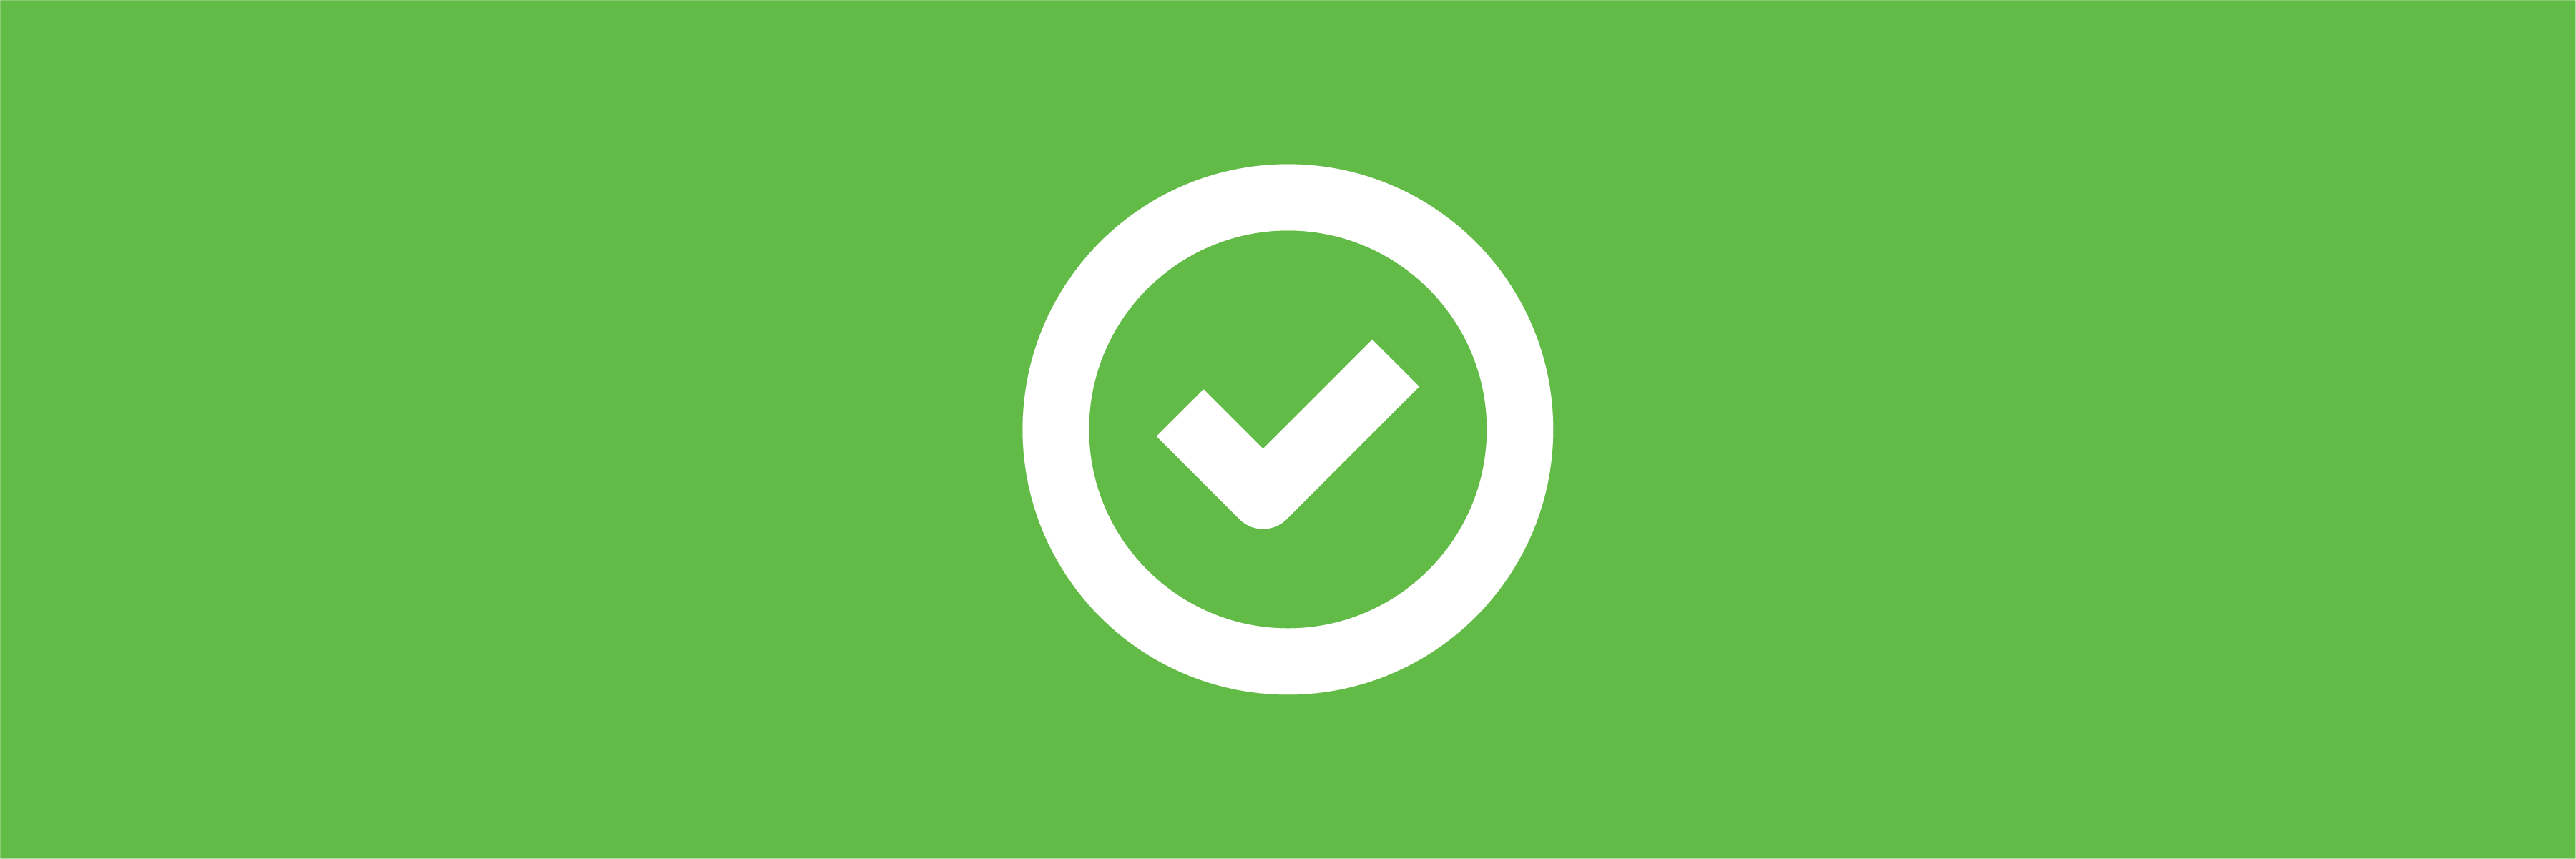 check mark icon on green background